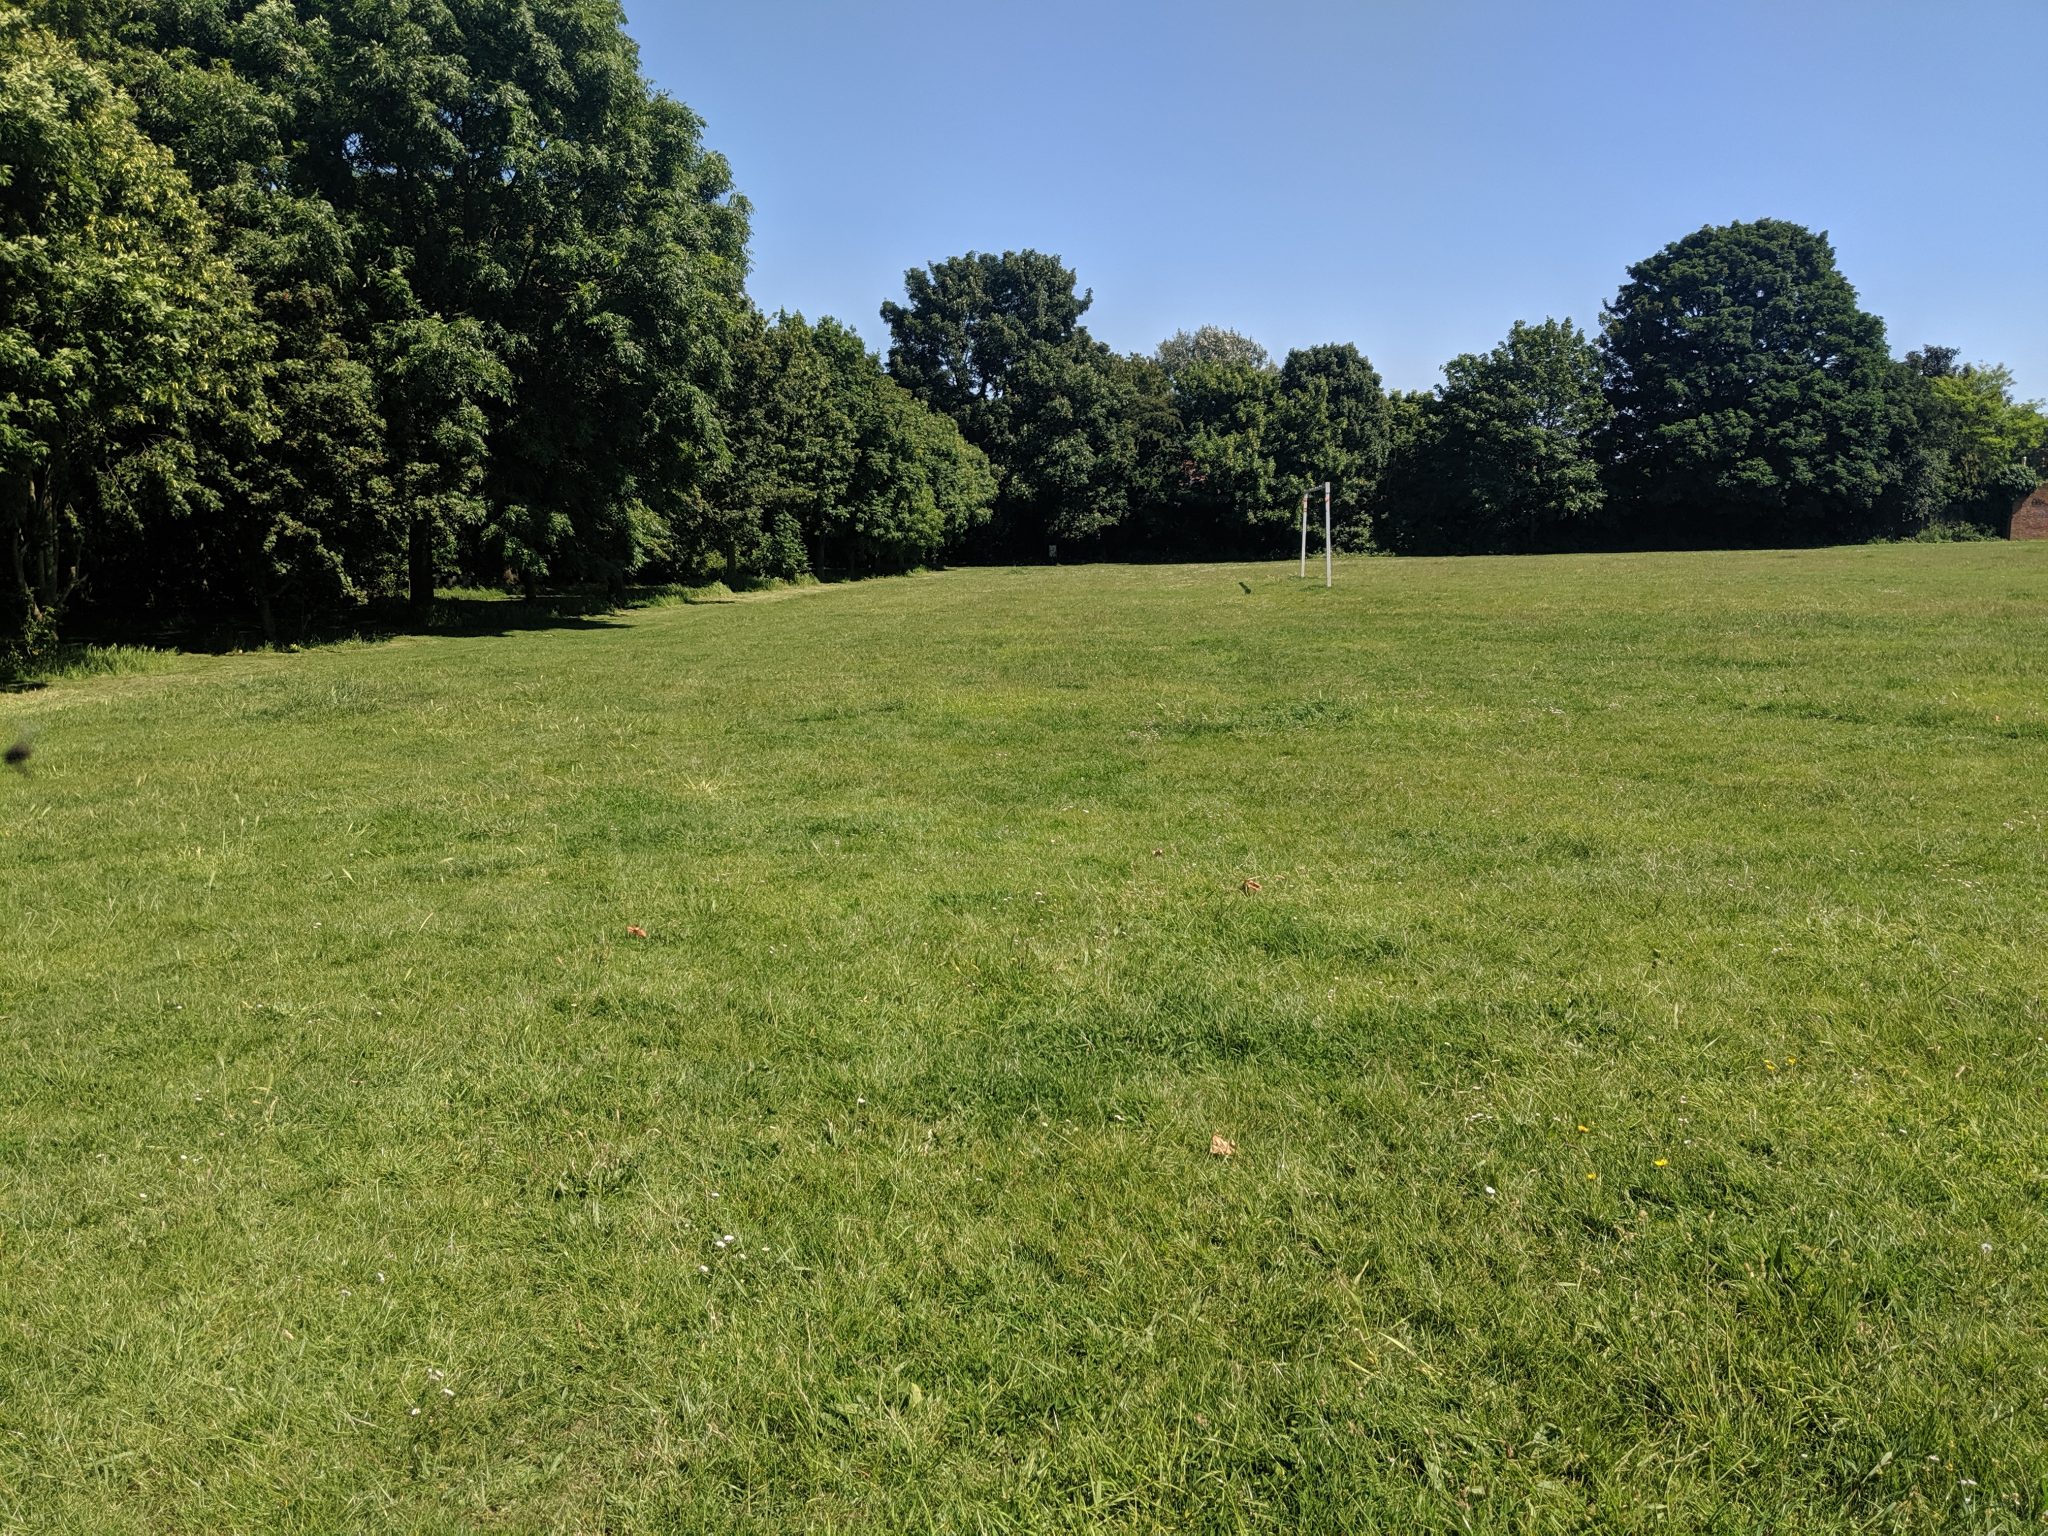 Large grass open space with a football goal surrounded by trees